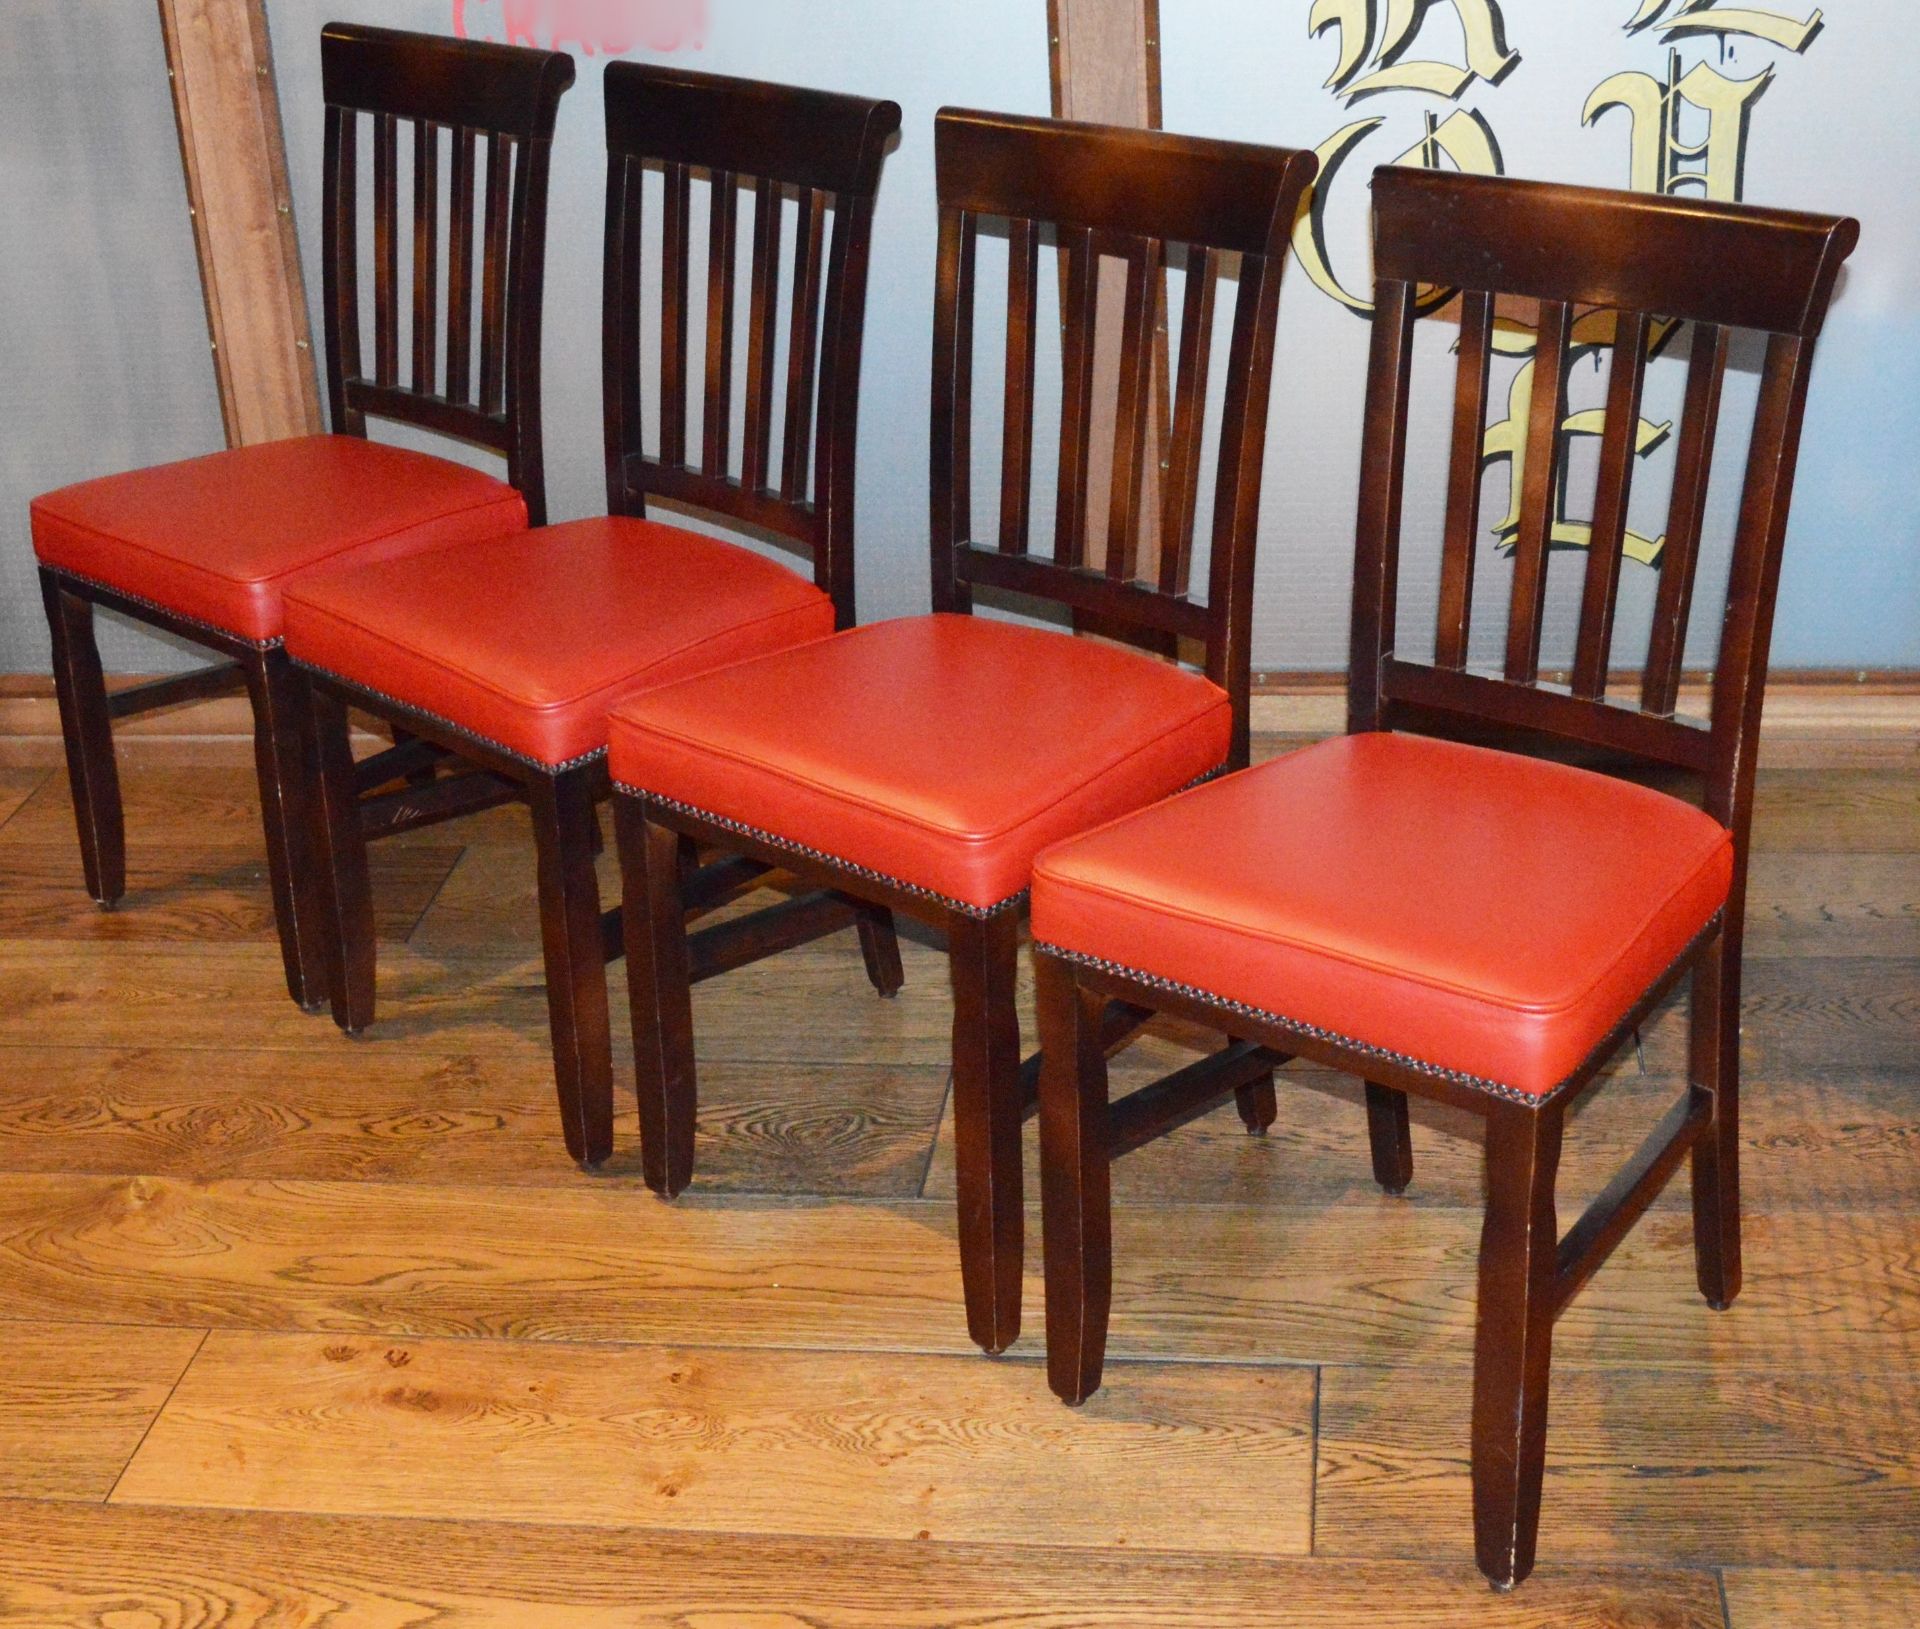 4 x Harley Chairs With Hardwoord Frames - Height 90 x Width 44 x Depth 39 cms - Seat Height 48 cms - Image 2 of 5